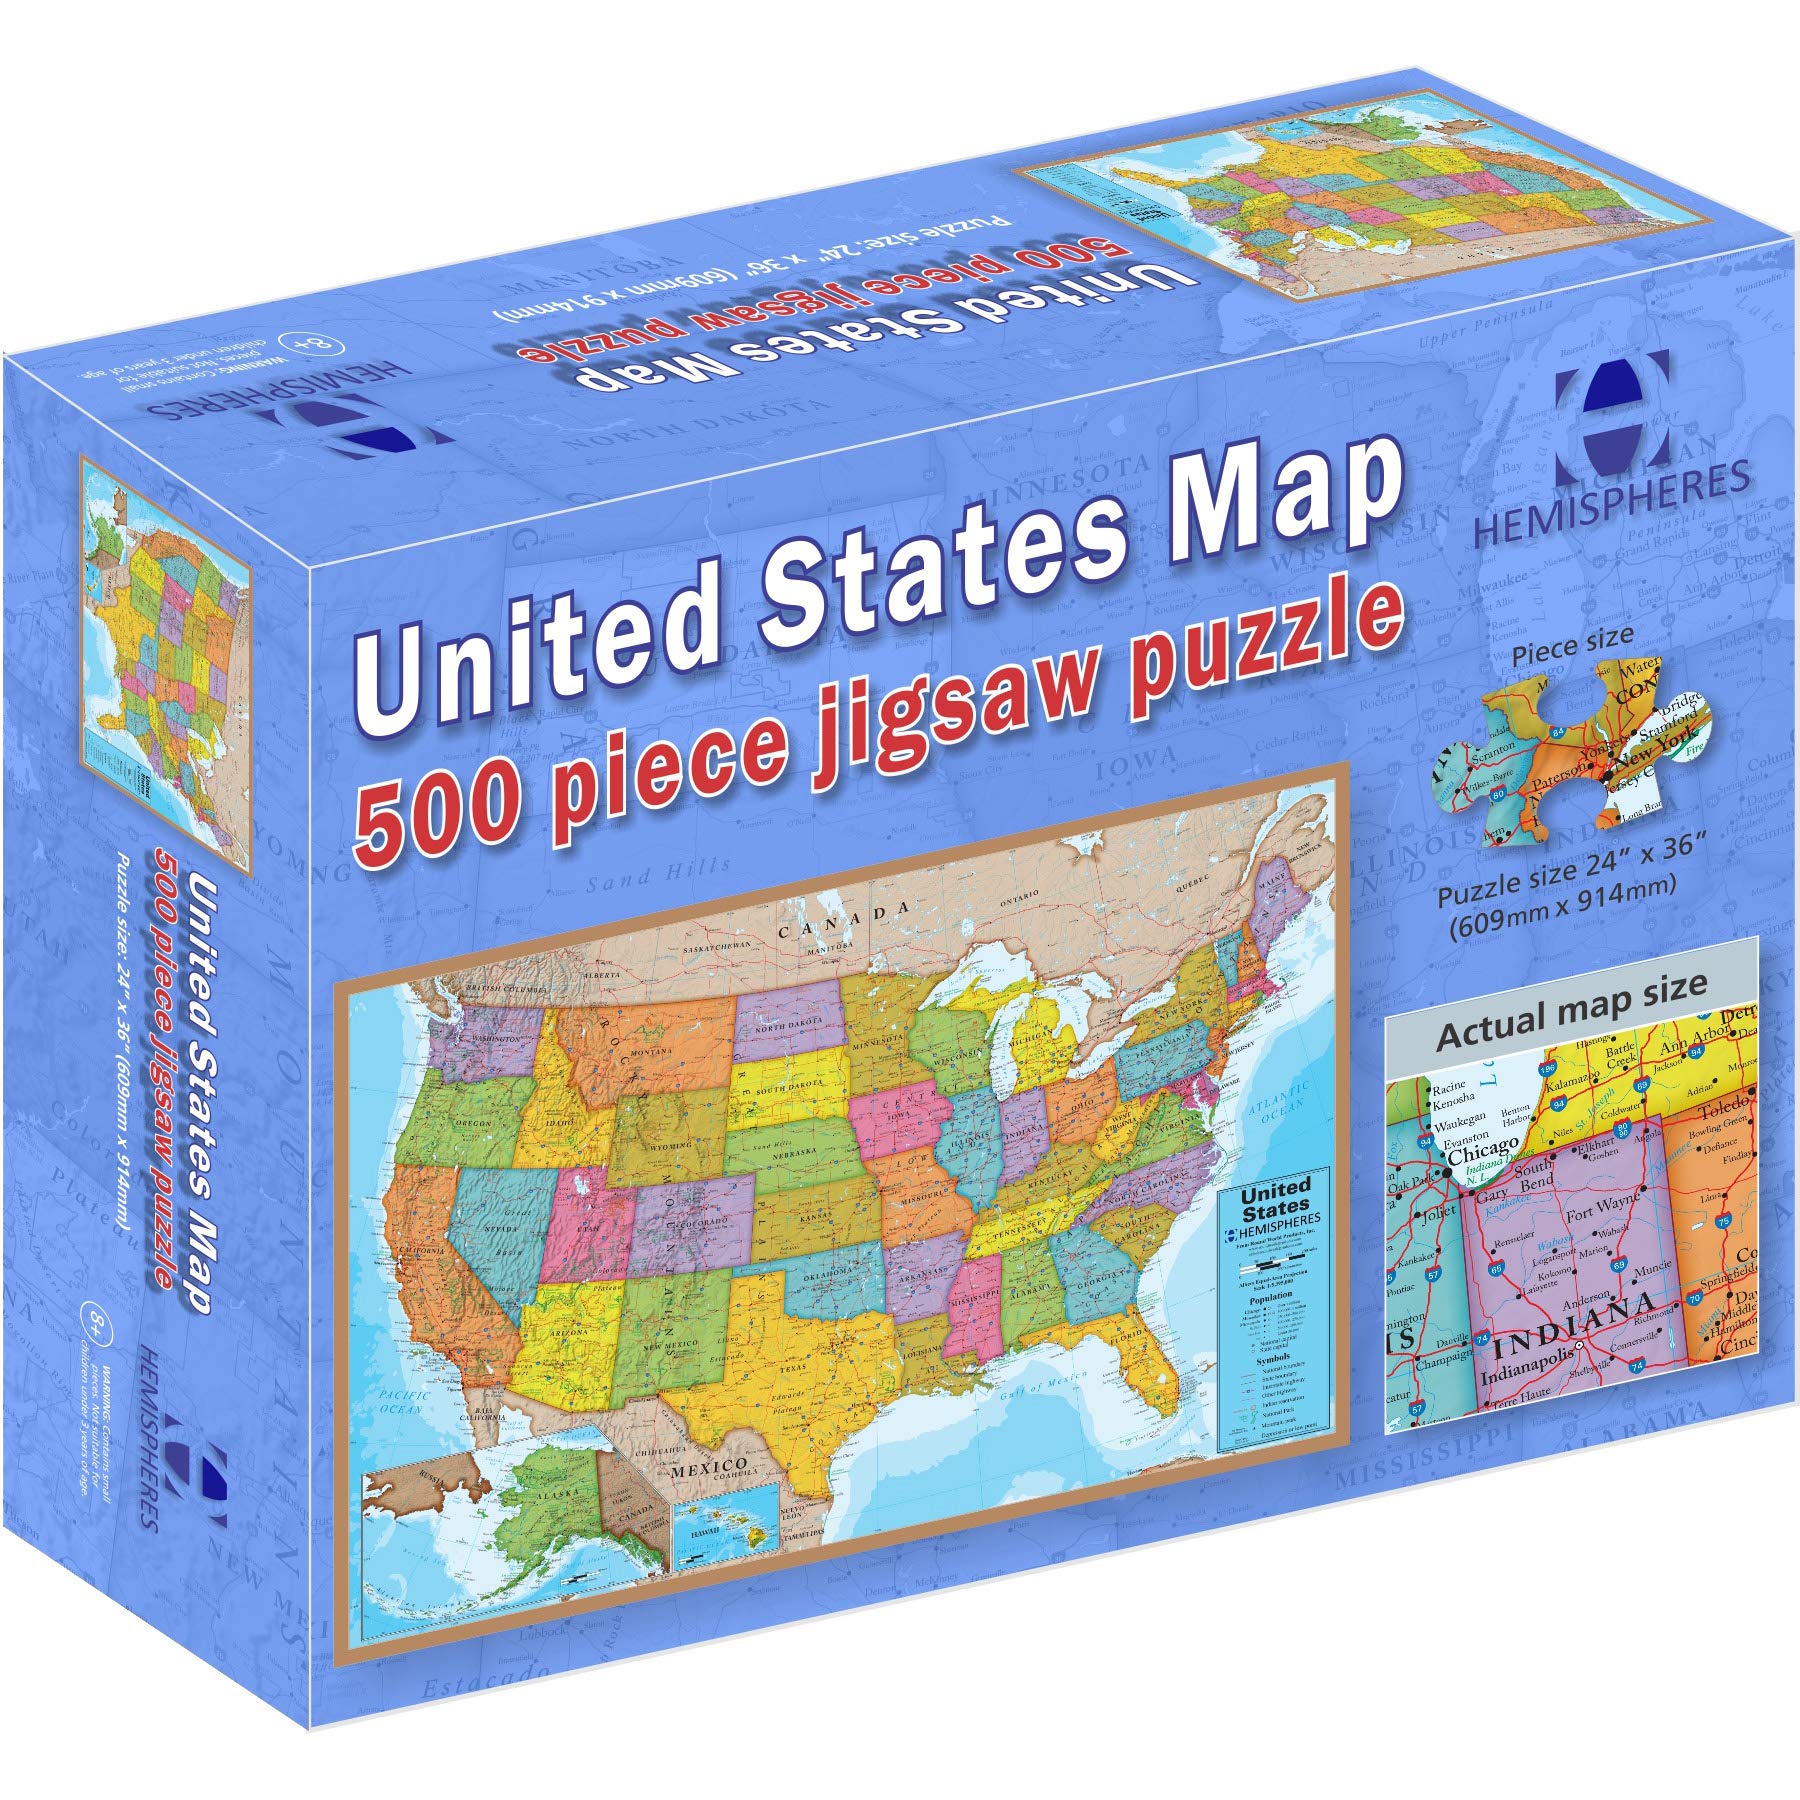 Waypoint Geographic USA Map 500-Piece Jigsaw Puzzle, Puzzles for Kids, Jigsaw Puzzles for Endless Fun, Educational Puzzles for Personalized Gifts, 24″ x 36”